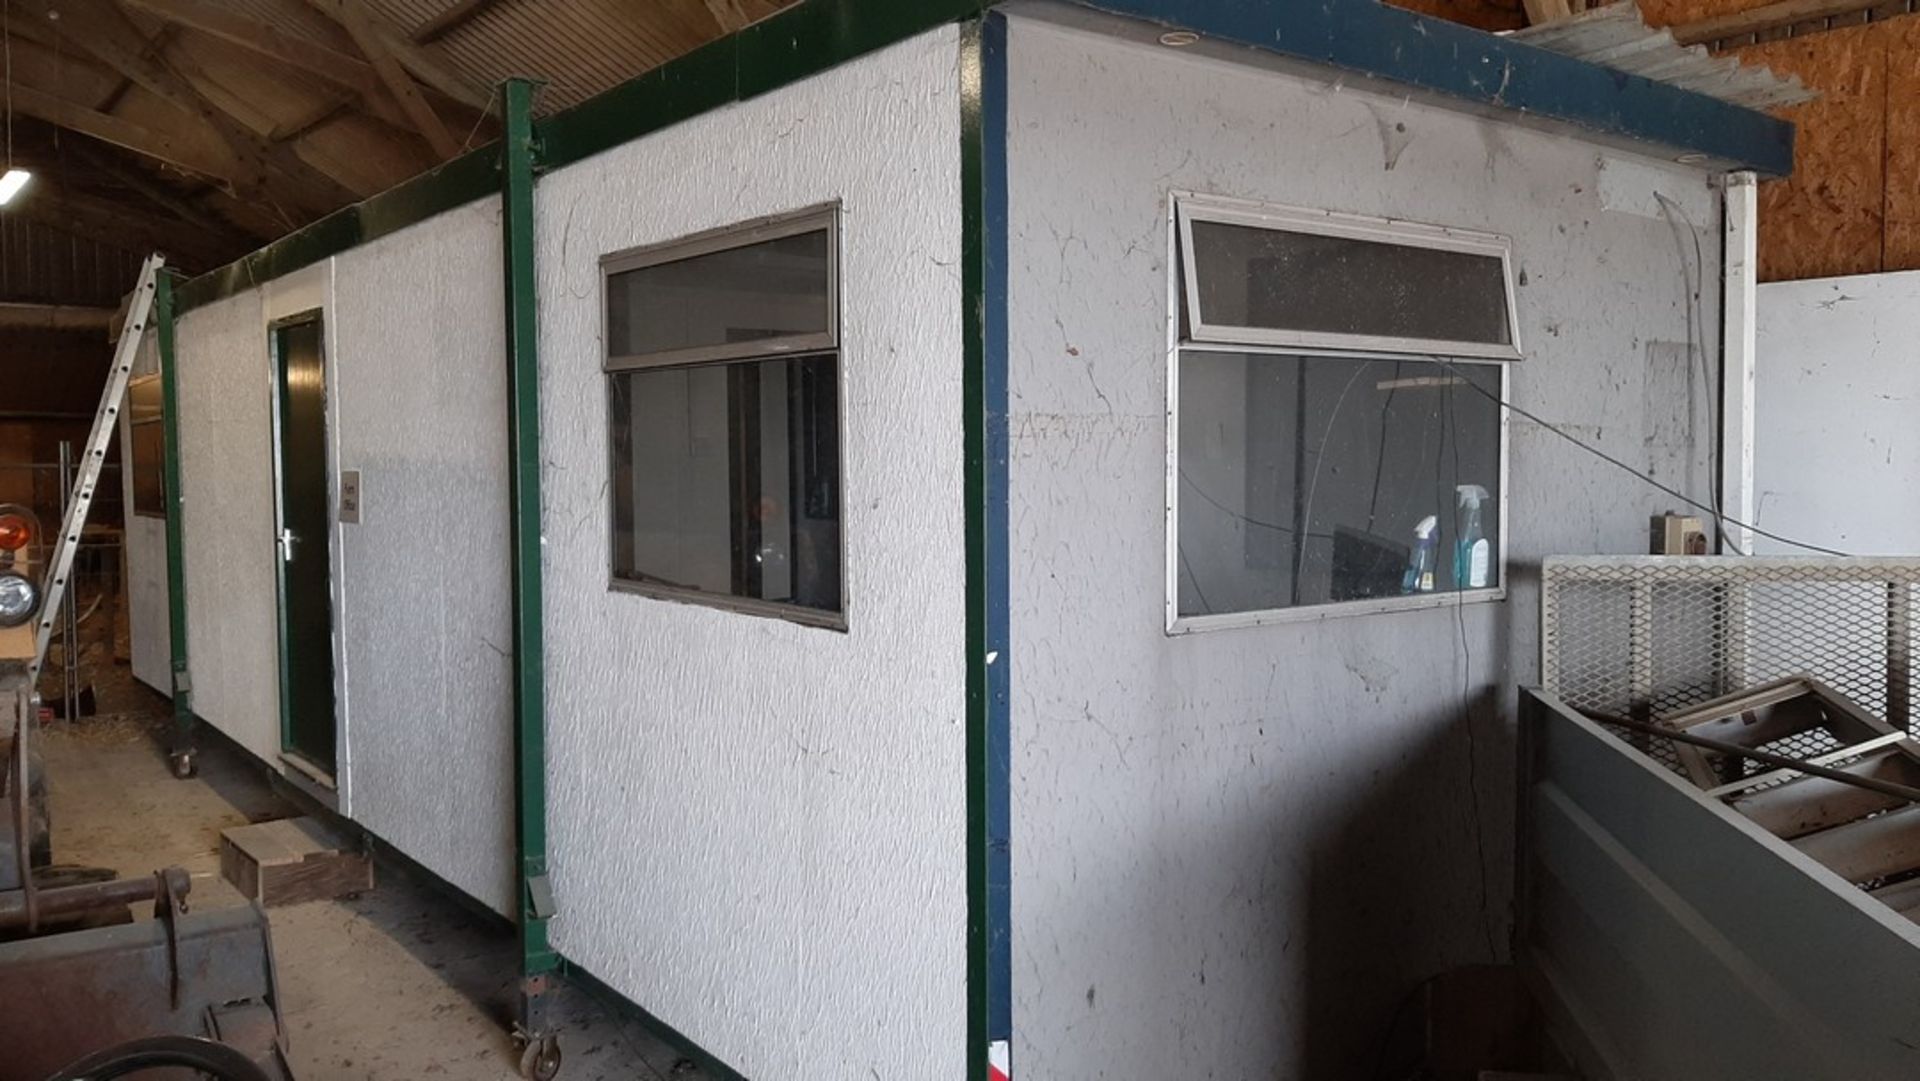 10ft x 32ft jack leg cabin. With two 10ftx 14ft rooms and hall. Used as office inside building.